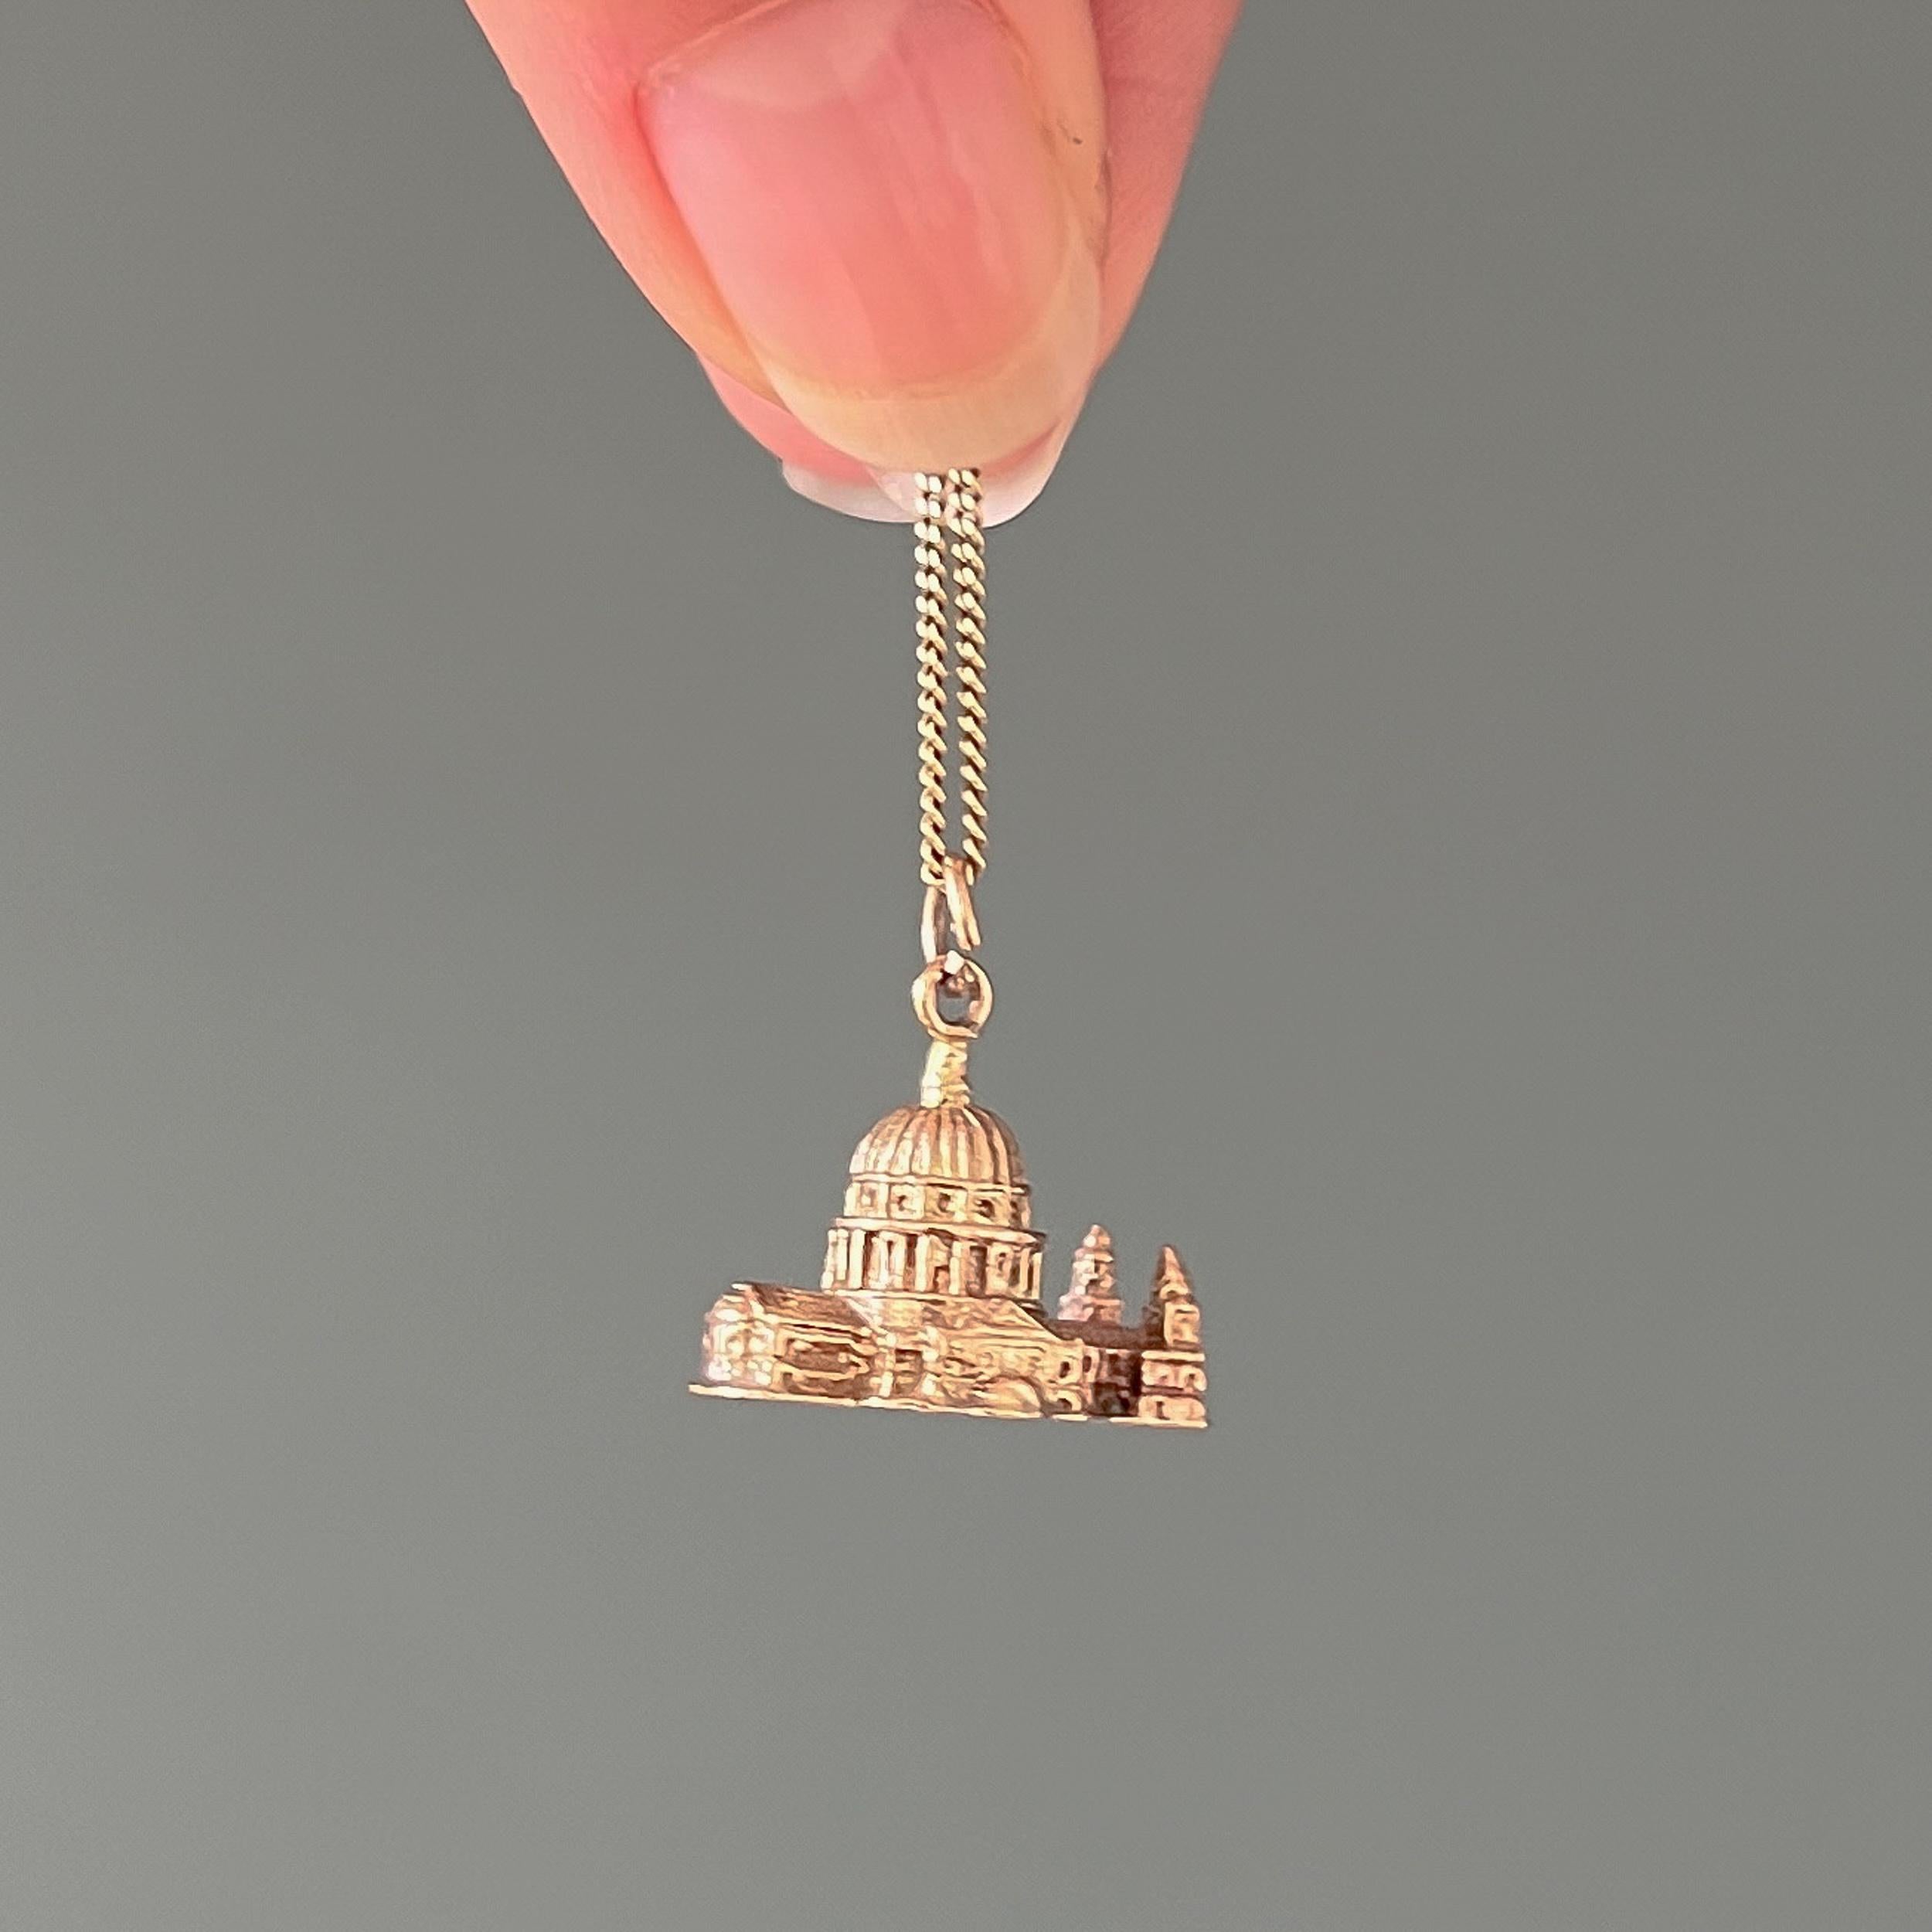 This is a vintage 9 karat yellow gold St. Paul's Cathedral charm pendant. This charm is very detailed and beautifully made. The miniature replica of the famous St. Paul's Cathedral has refined details include small windows and the cathedral's iconic